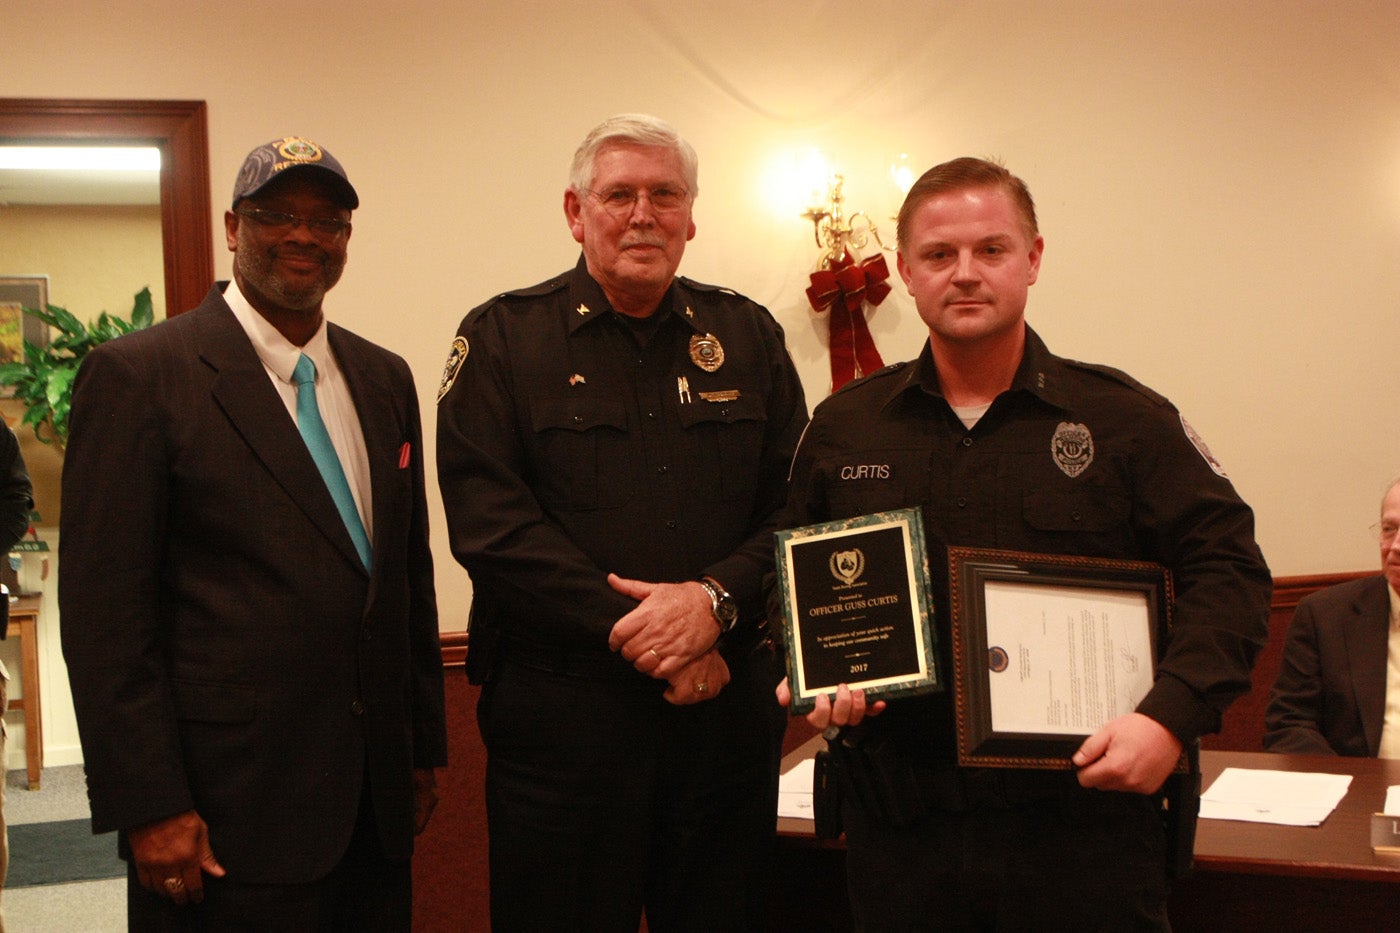 Wilmore Police Officer Guss Curtis was recognized Monday night at the Wilmore City Council meeting for intervening in an altercation at a Lexington-area restaurant while he was off duty late last month. Presenting him with the award was William “Sarge” Farris, the director of the Legends Boxing Club, and Wilmore Police Chief William Craig.